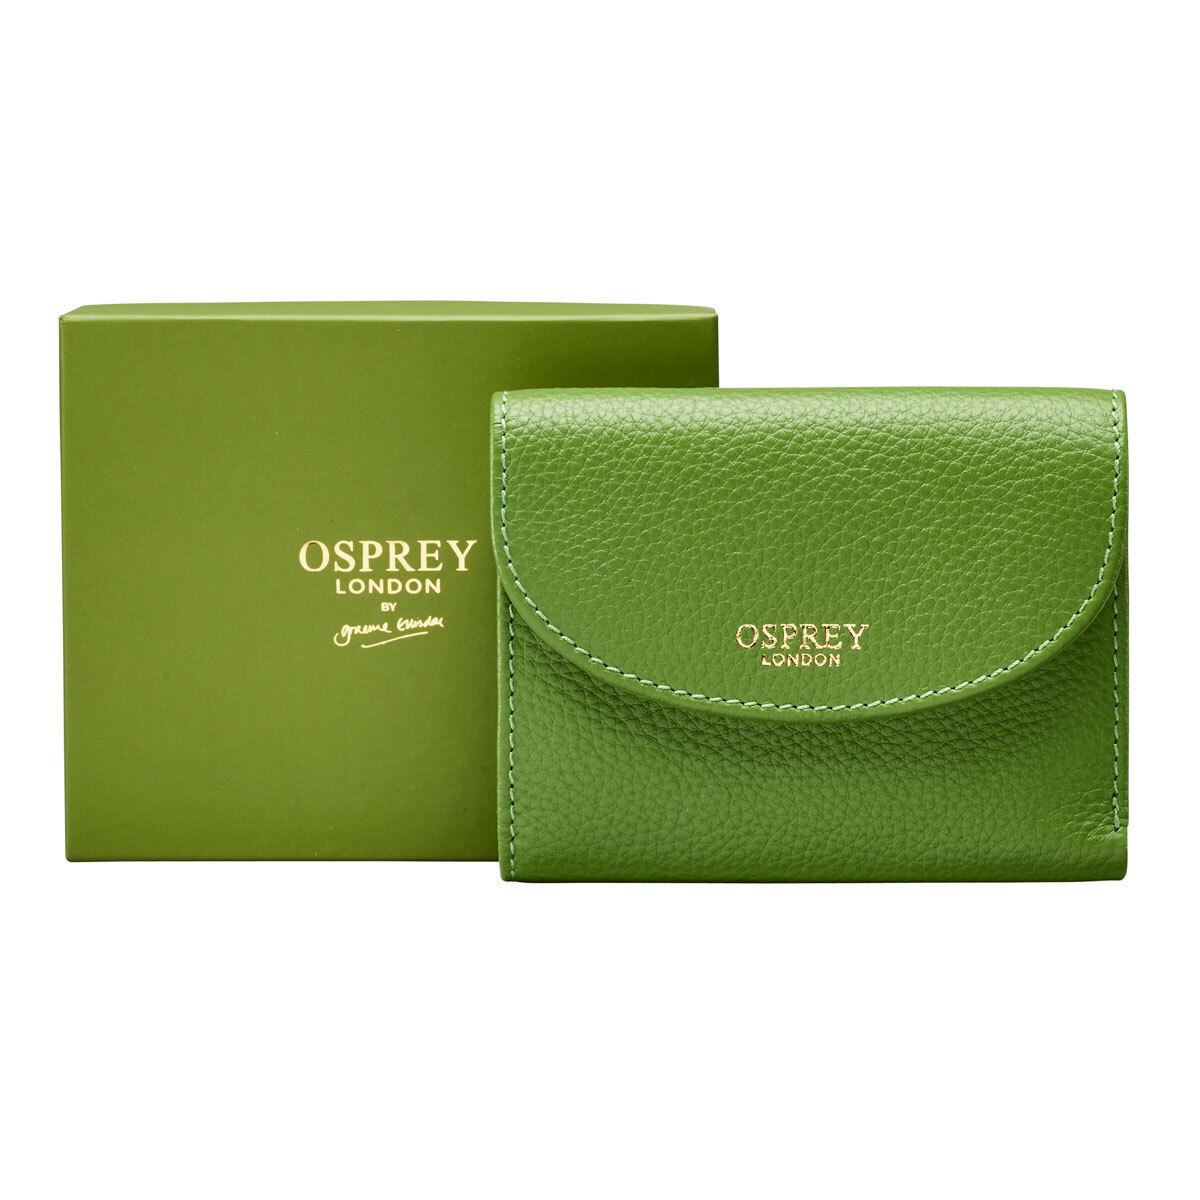 Osprey London Tilly Grainy Hide Leather Women's Purse, Apple with Gift Box